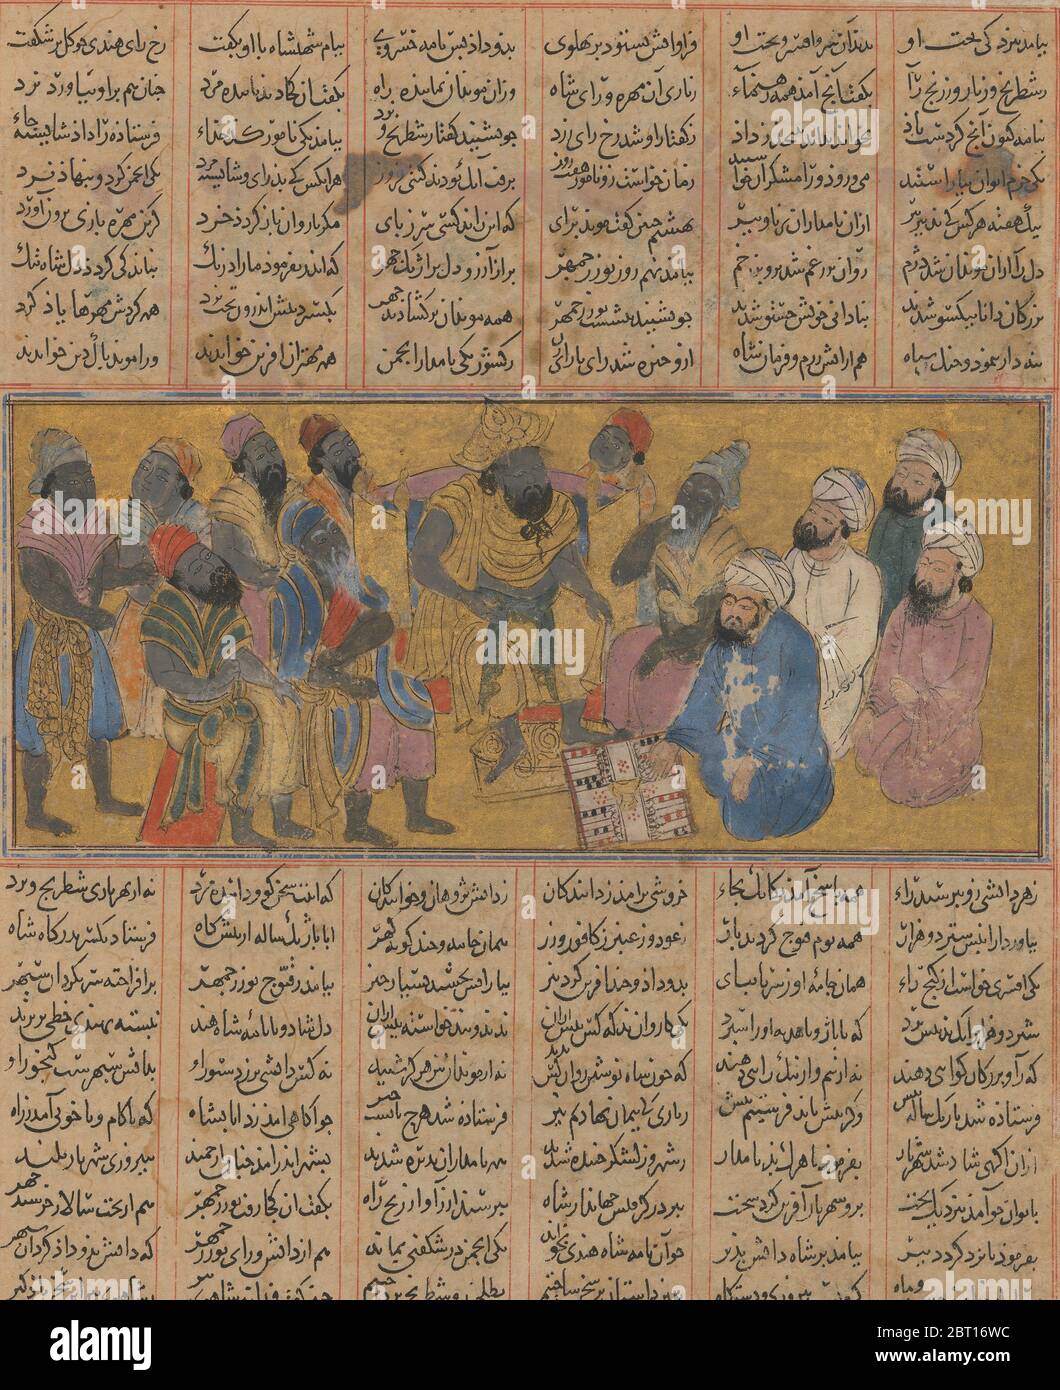 Buzurjmihr Explains the Game of Backgammon (Nard) to the Raja of Hind, Folio from the First Small Shahnama (Book of Kings), ca. 1300-30. Stock Photo